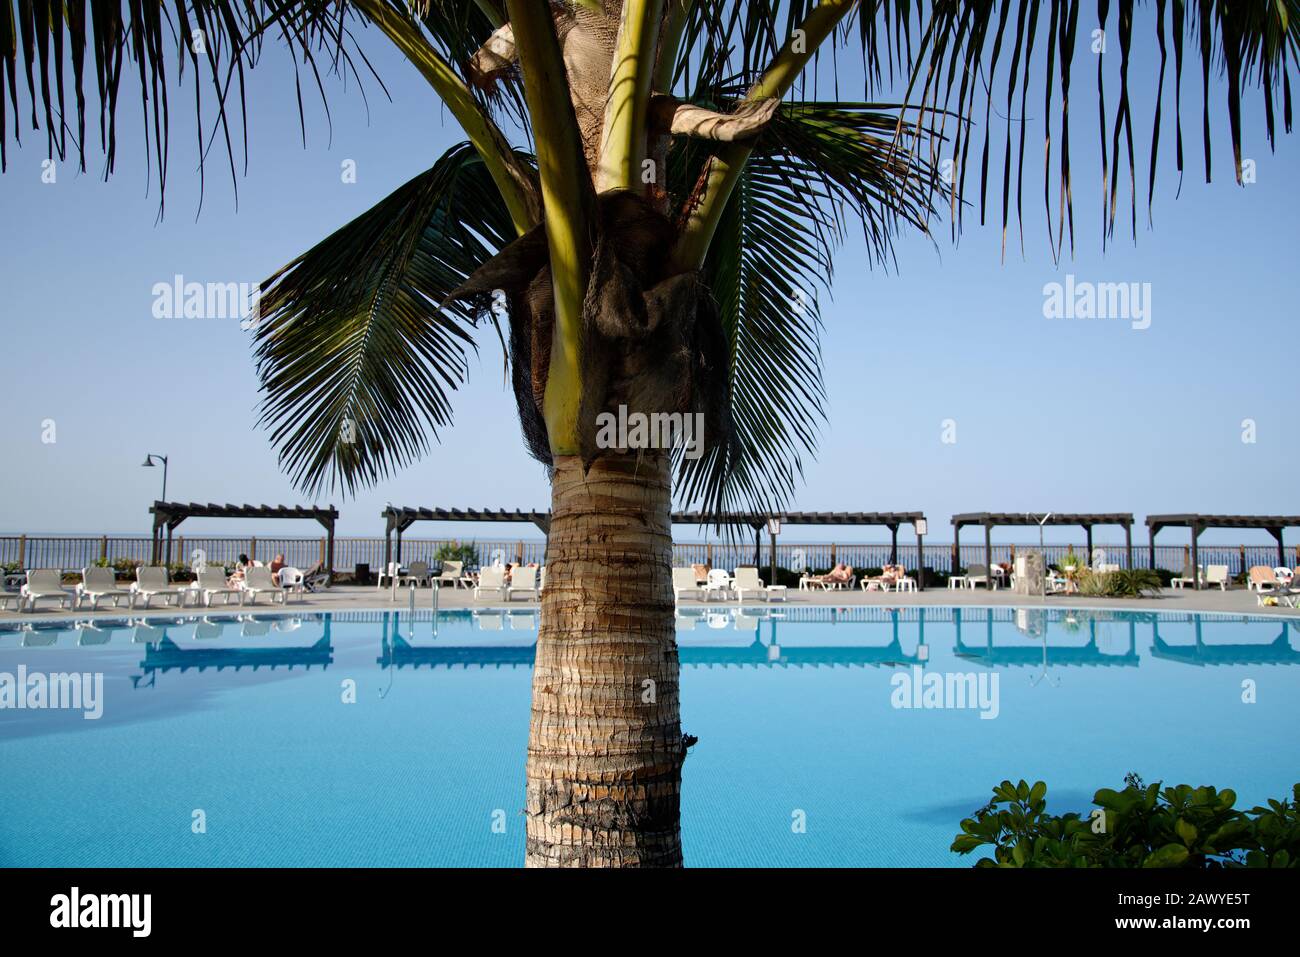 Holiday resort general picture. Resort buildings, palm trees and swimming pool. Stock Photo